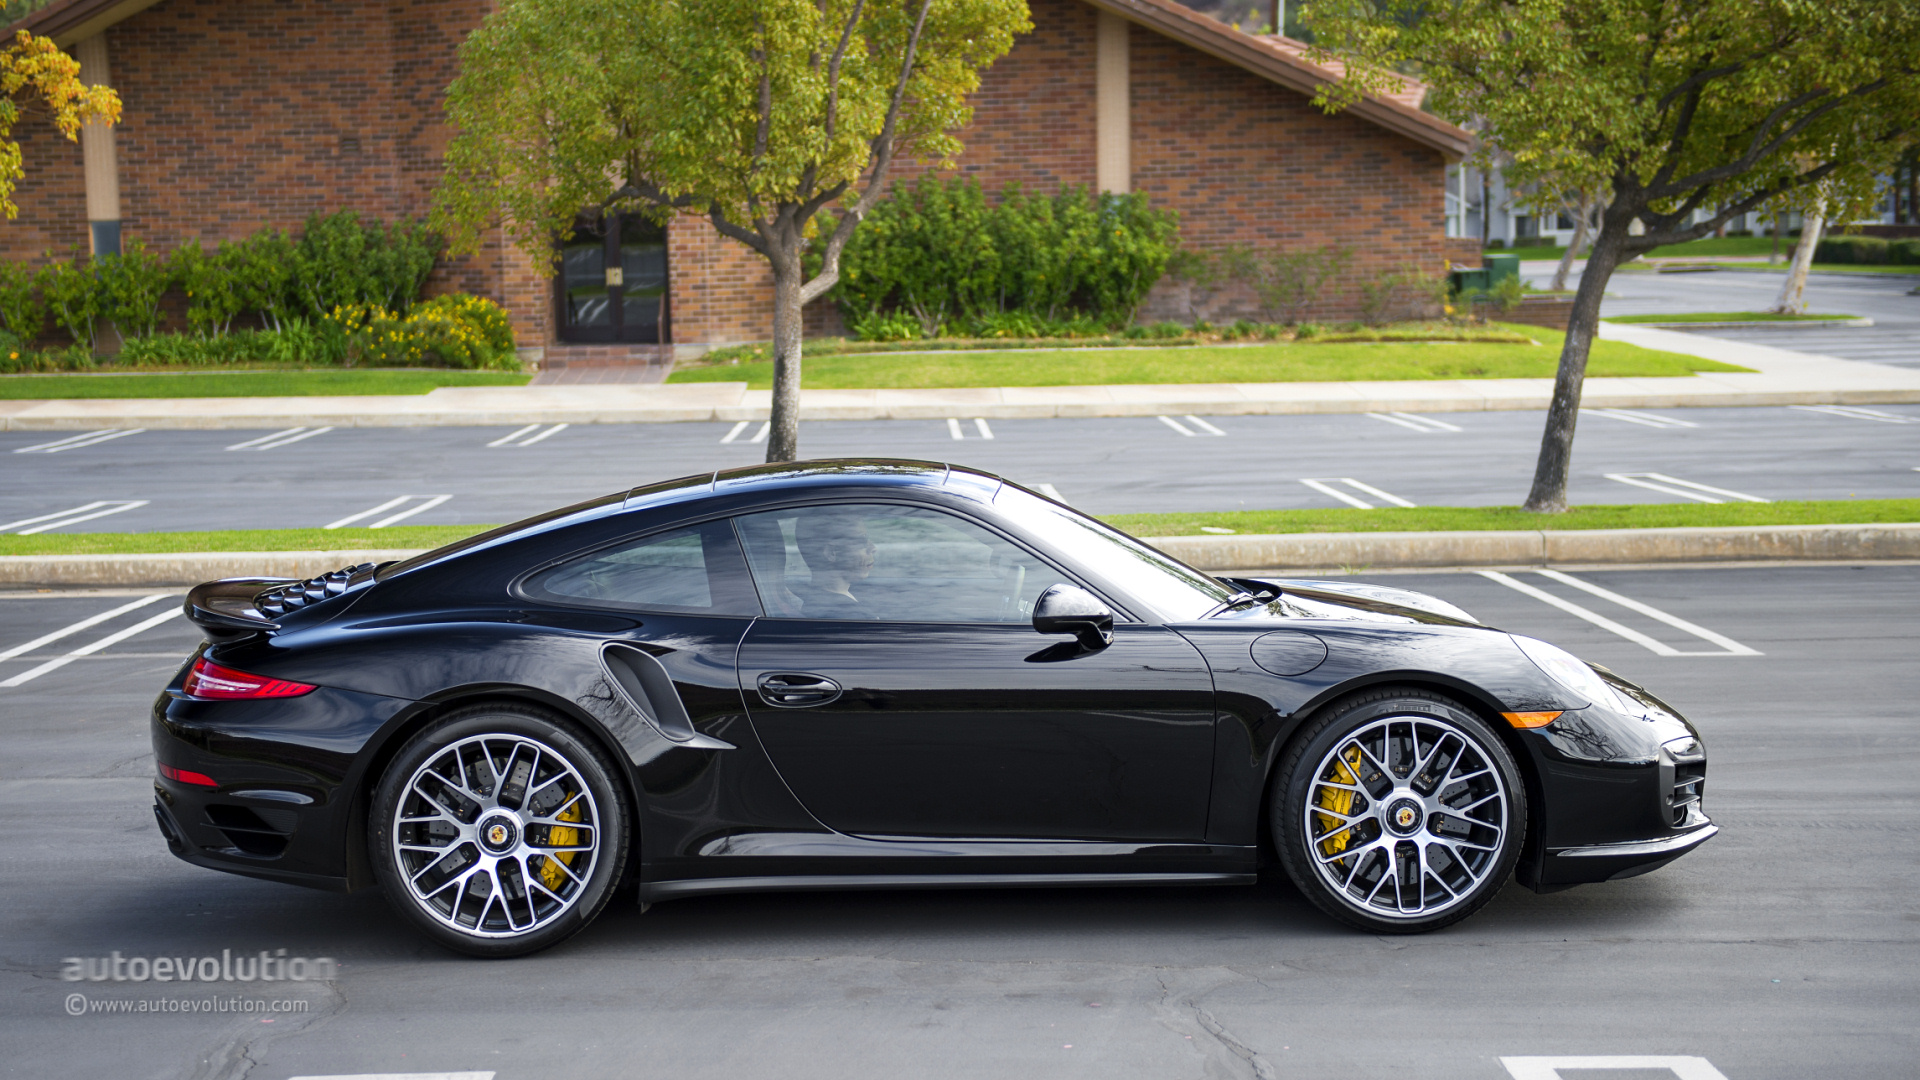 United States AI Solar System (4) - Page 16 2014-porsche-911-turbo-s-review-2014_55